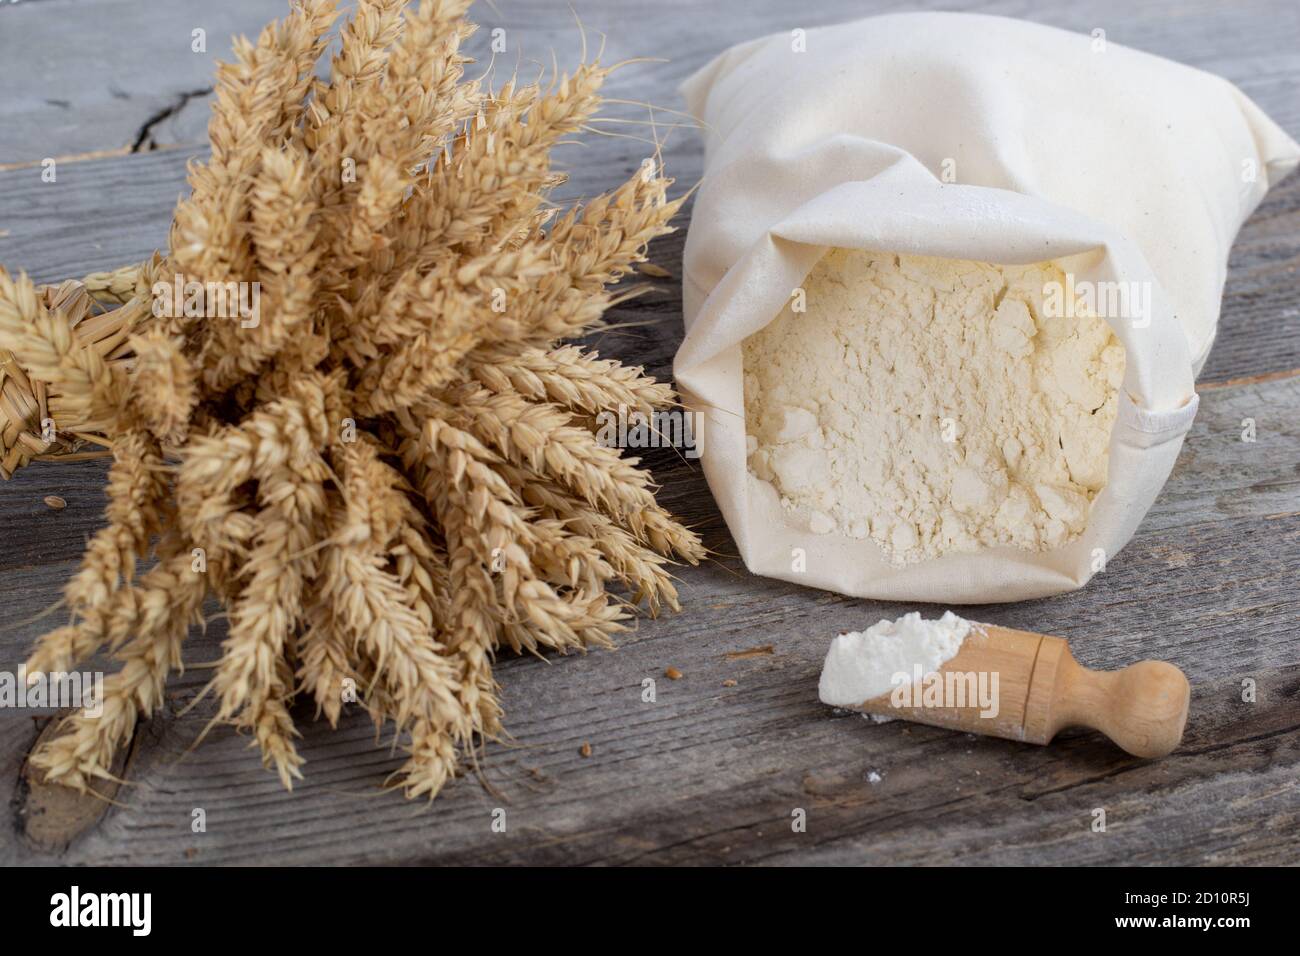 Flour sack, ears and wooden measuring cup on wooden background. Natural baking products. Stock Photo